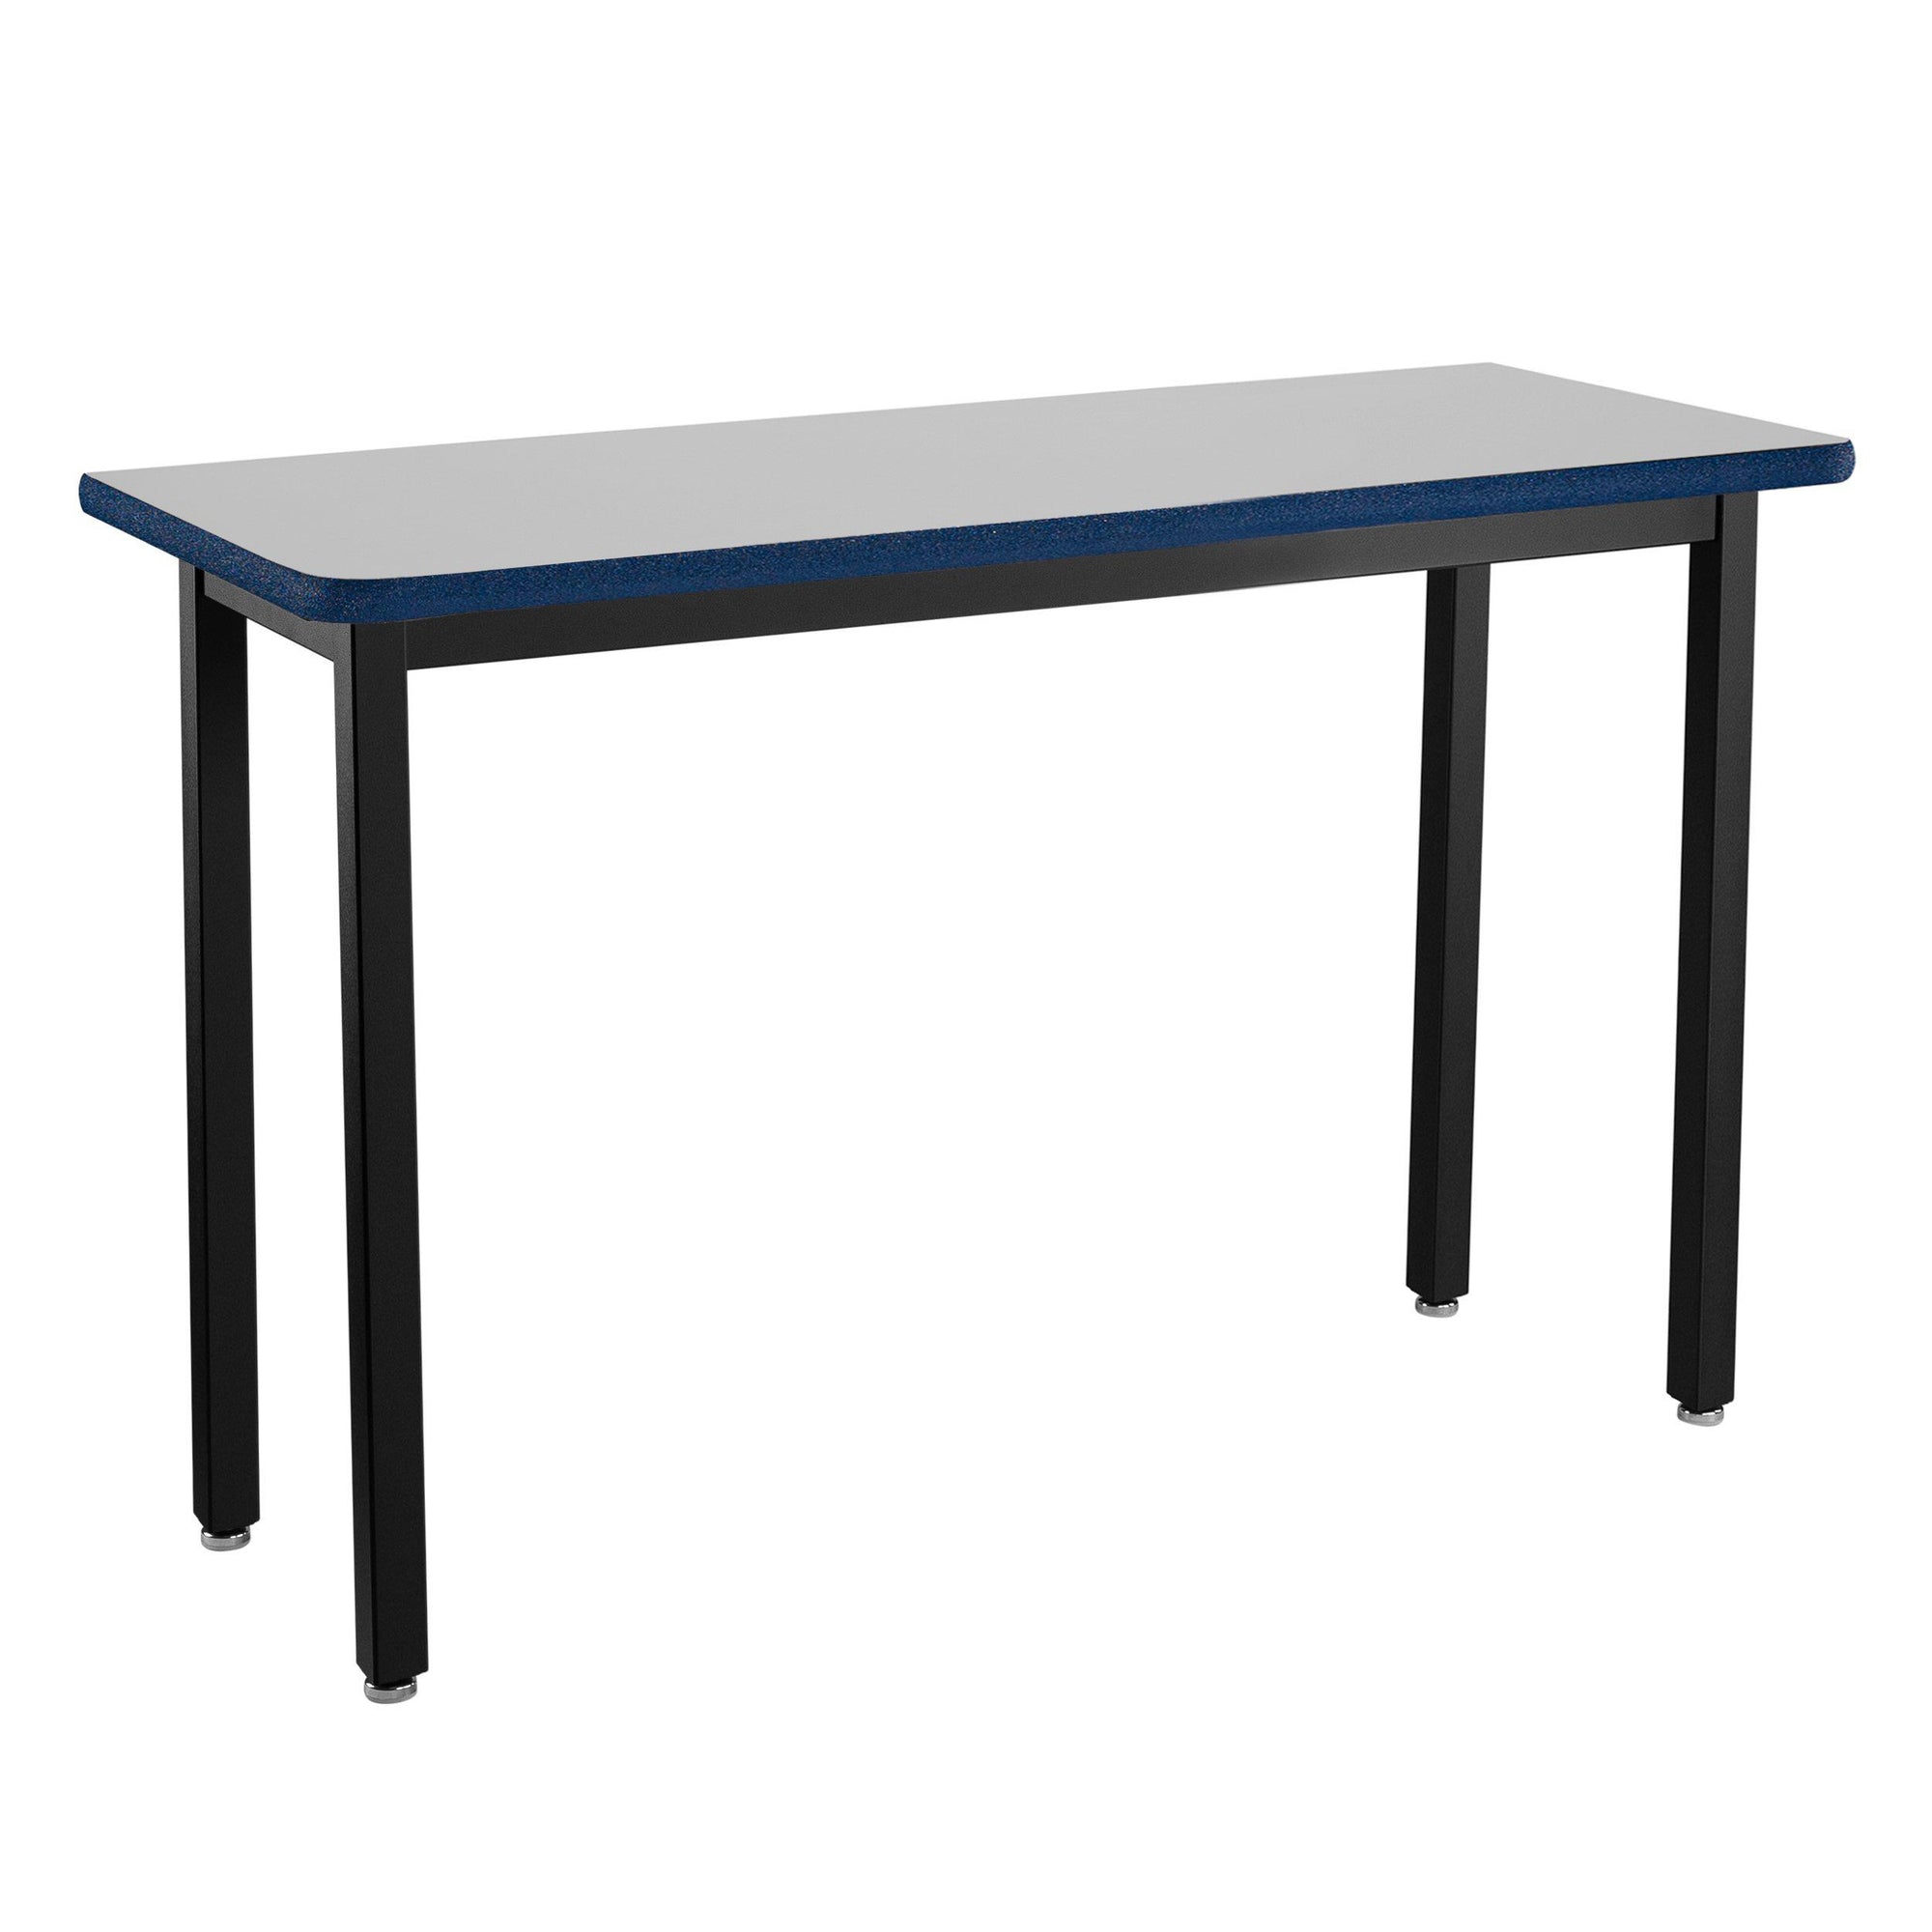 Heavy-Duty Fixed Height Utility Table, Black Frame, 18" x 48", Supreme High-Pressure Laminate Top with Black ProtectEdge